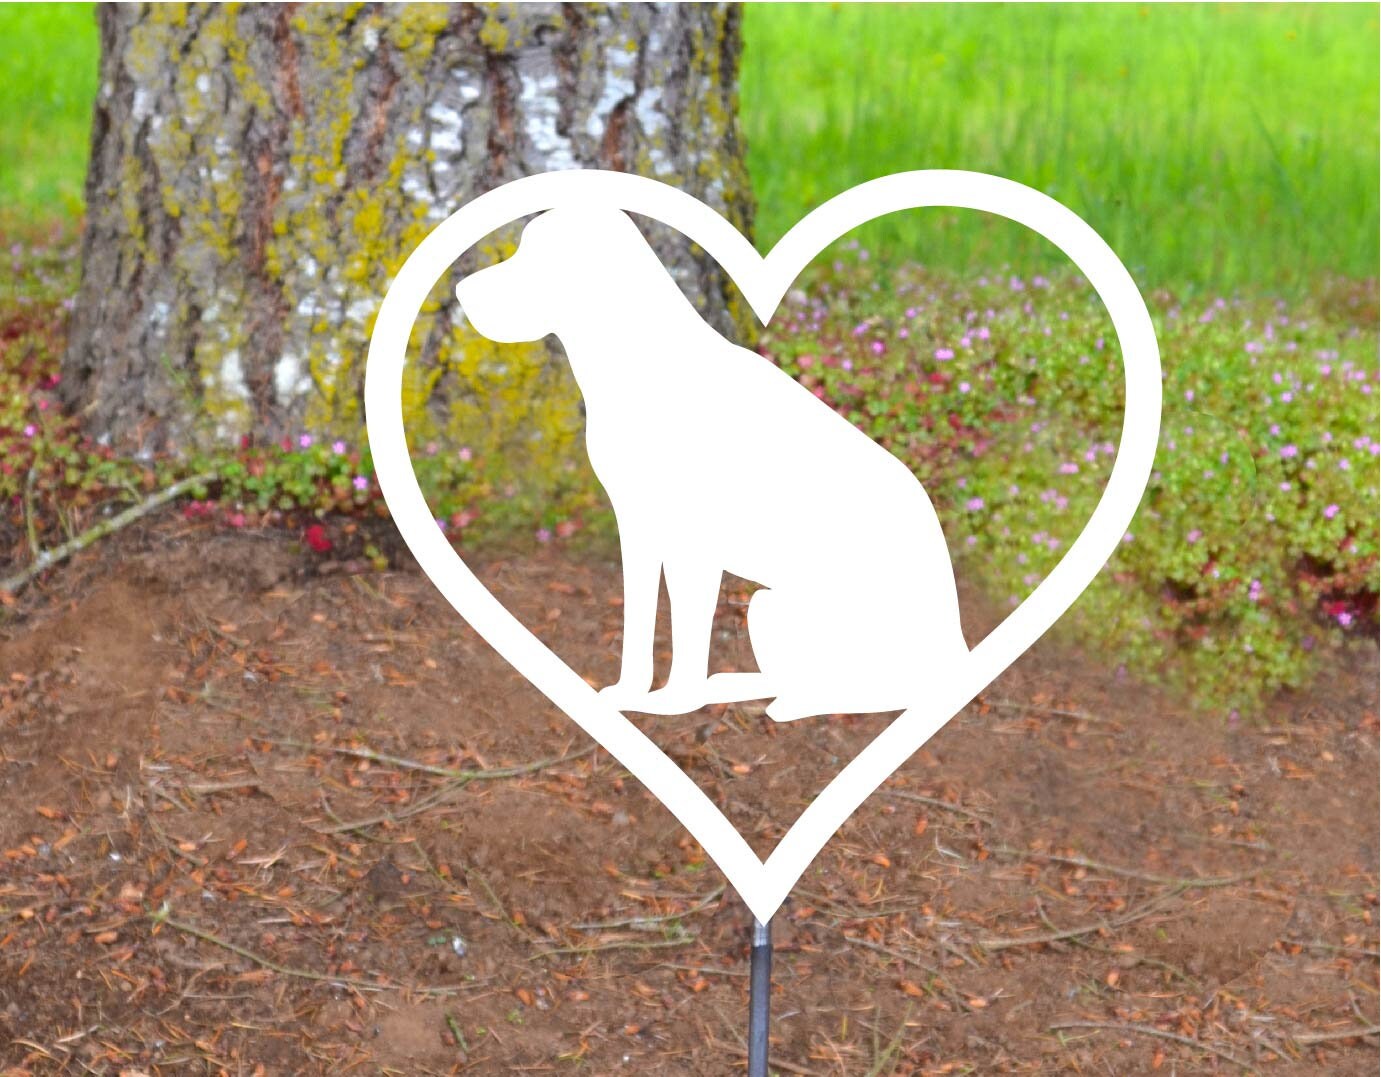 Metal Art Labrador Retriever Love in Heart Outline Stake Decoration, Lover Garden Yard Art Gift Garden Decoration Outdoor Decor, Lab Mom Dad Stake Attached(12" Stake Detachable)